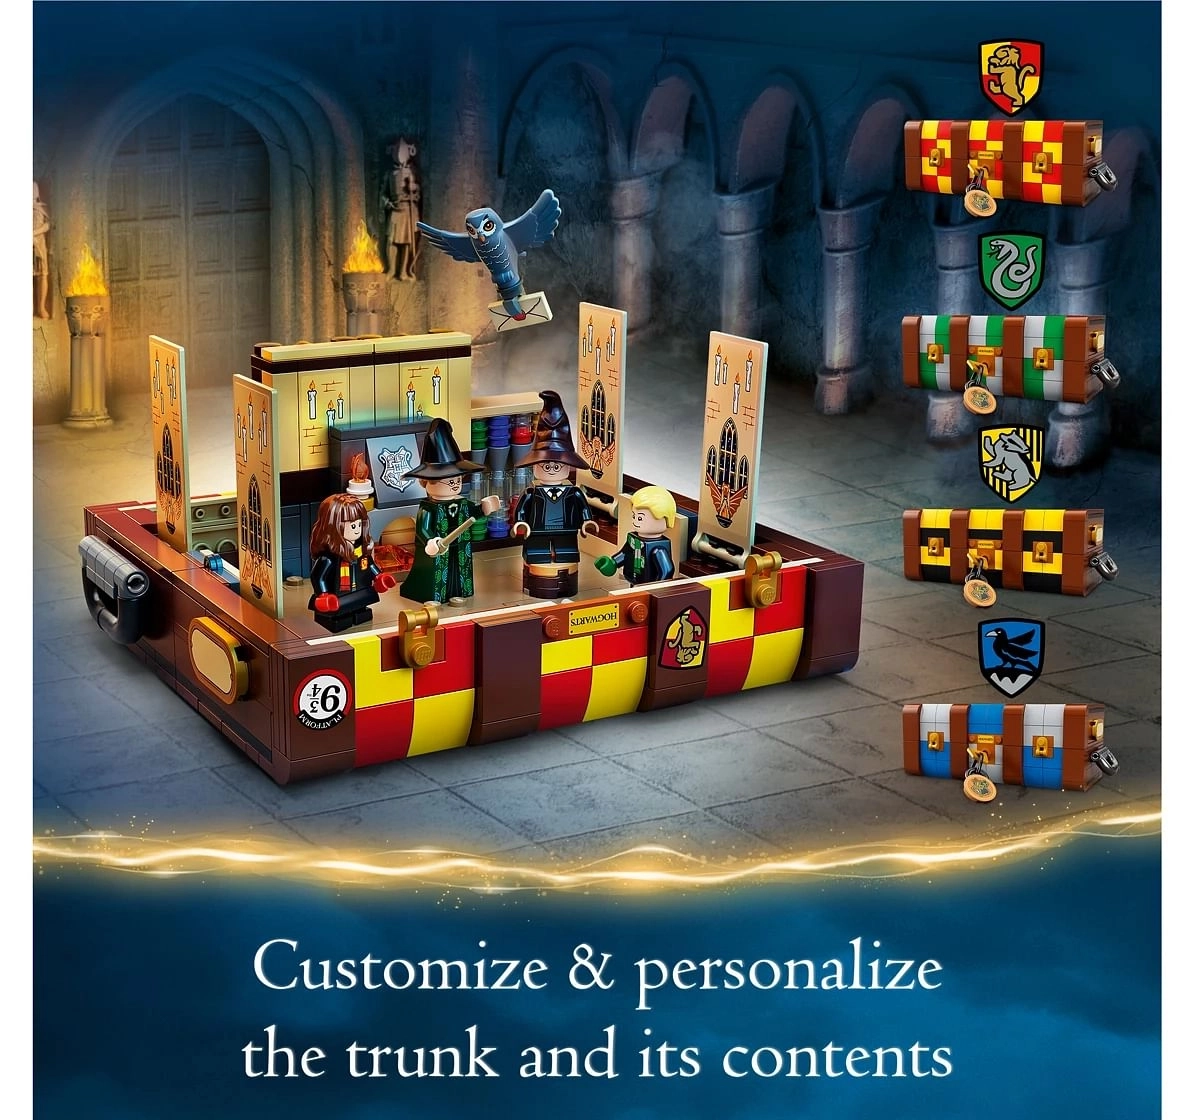 Lego Harry Potter Hogwarts Magical Trunk Building Kit Featuring Popular  Character Minifigures from The Harry Potter